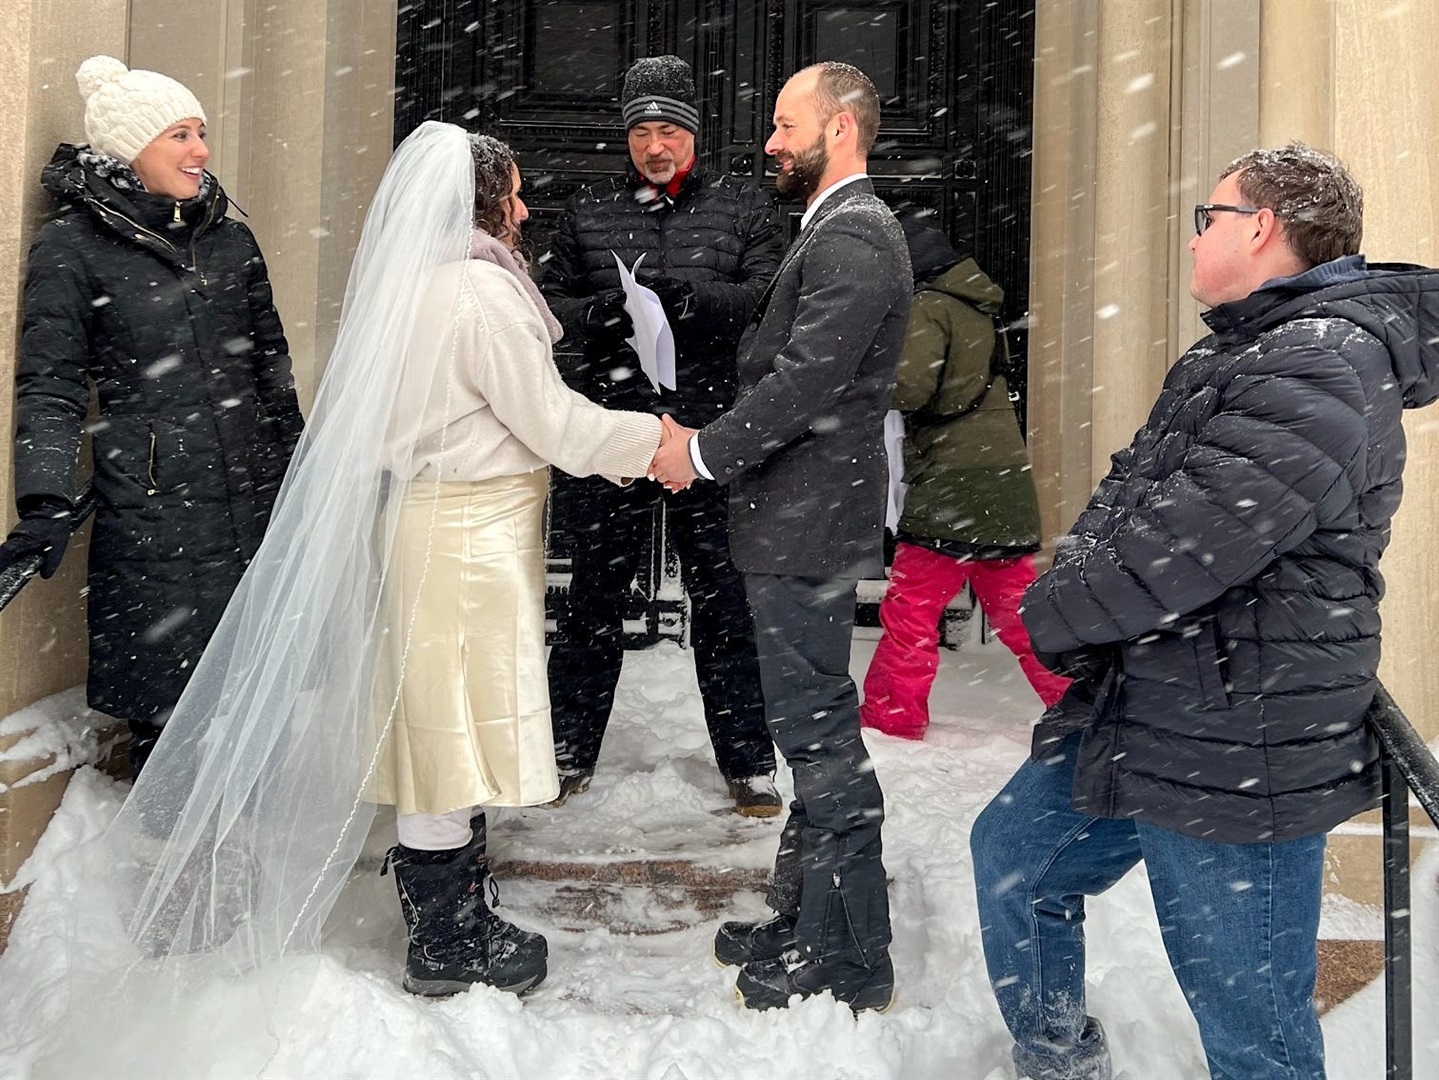 Couple Snowed In With Wedding Guests Got Married In Middle Of Blizzard — Had Snowball Fight